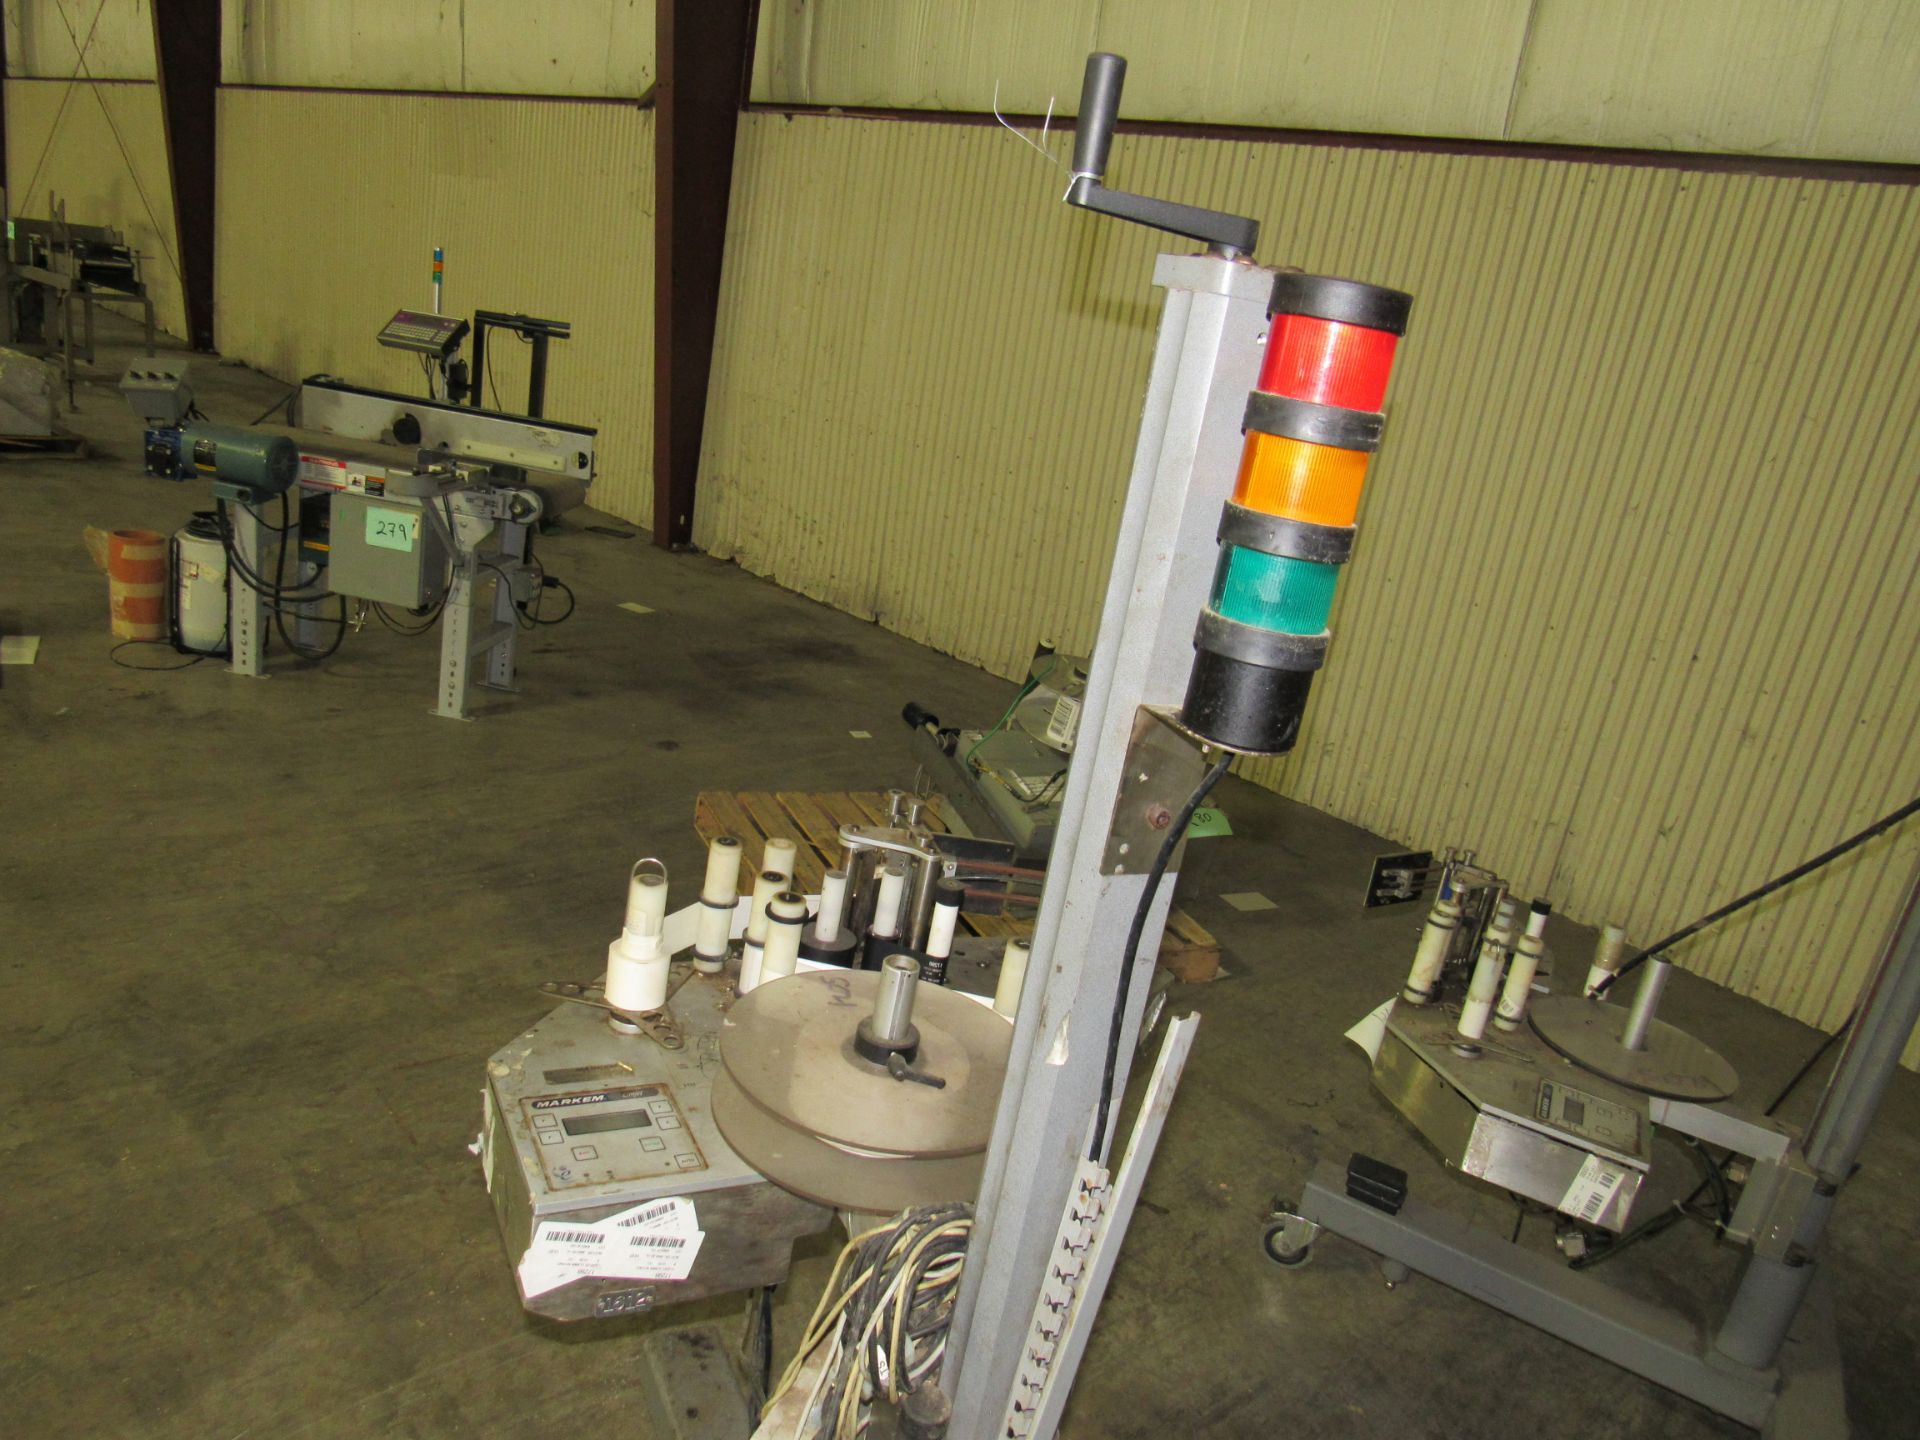 Markem CE Label Printer, Label Applicator used for labeling boxes, on Tripod Base with Casters. Free - Image 7 of 9